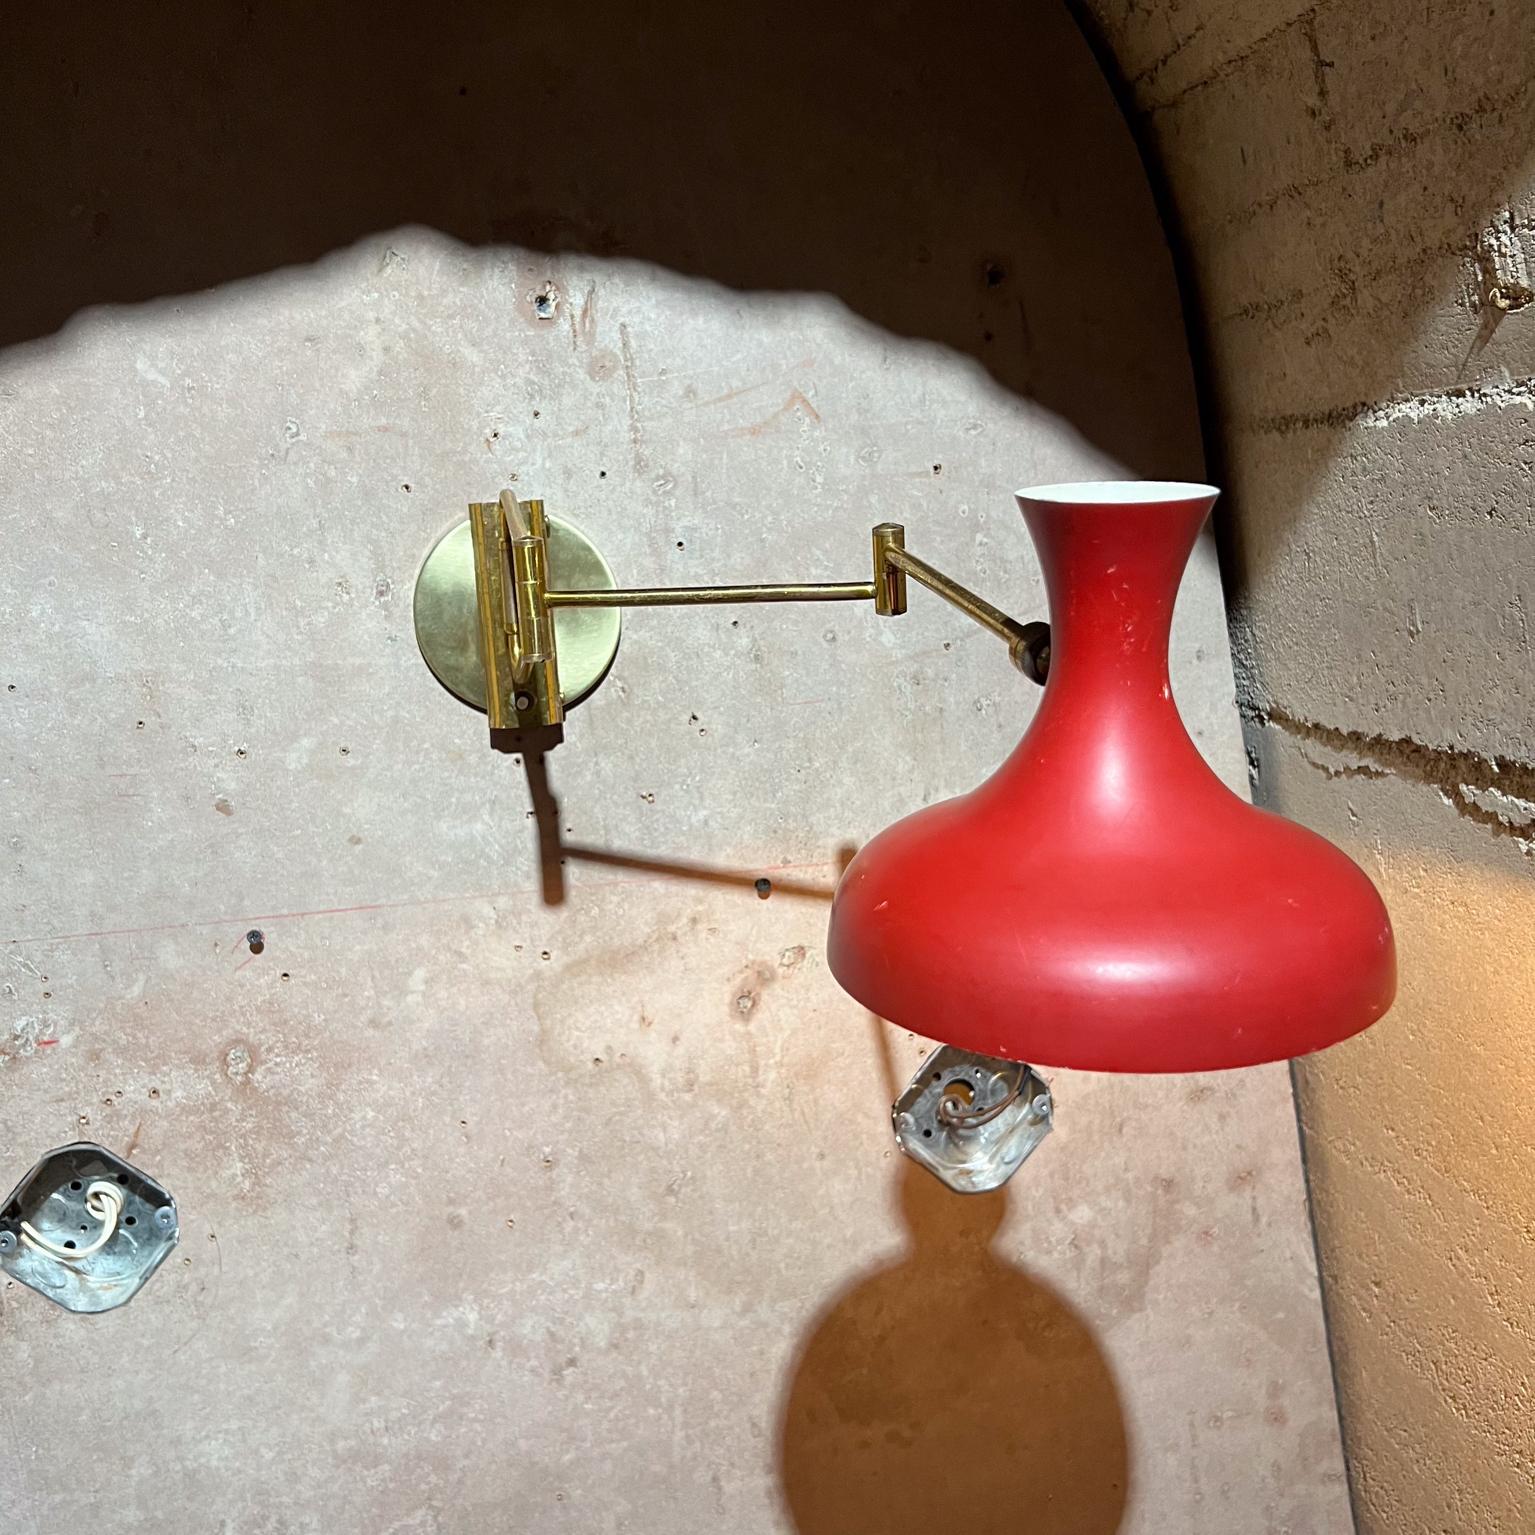 AMBIANIC presents
1950s French Wall Sconce Red Lamp Patinated Brass France
Attributed to Pierre Guariche. Made in France.
Unmarked
6 h x 7 w x 25.5 long
Articulating arm
In vintage condition
New wire retrofitted new socket new backplate. 
Original